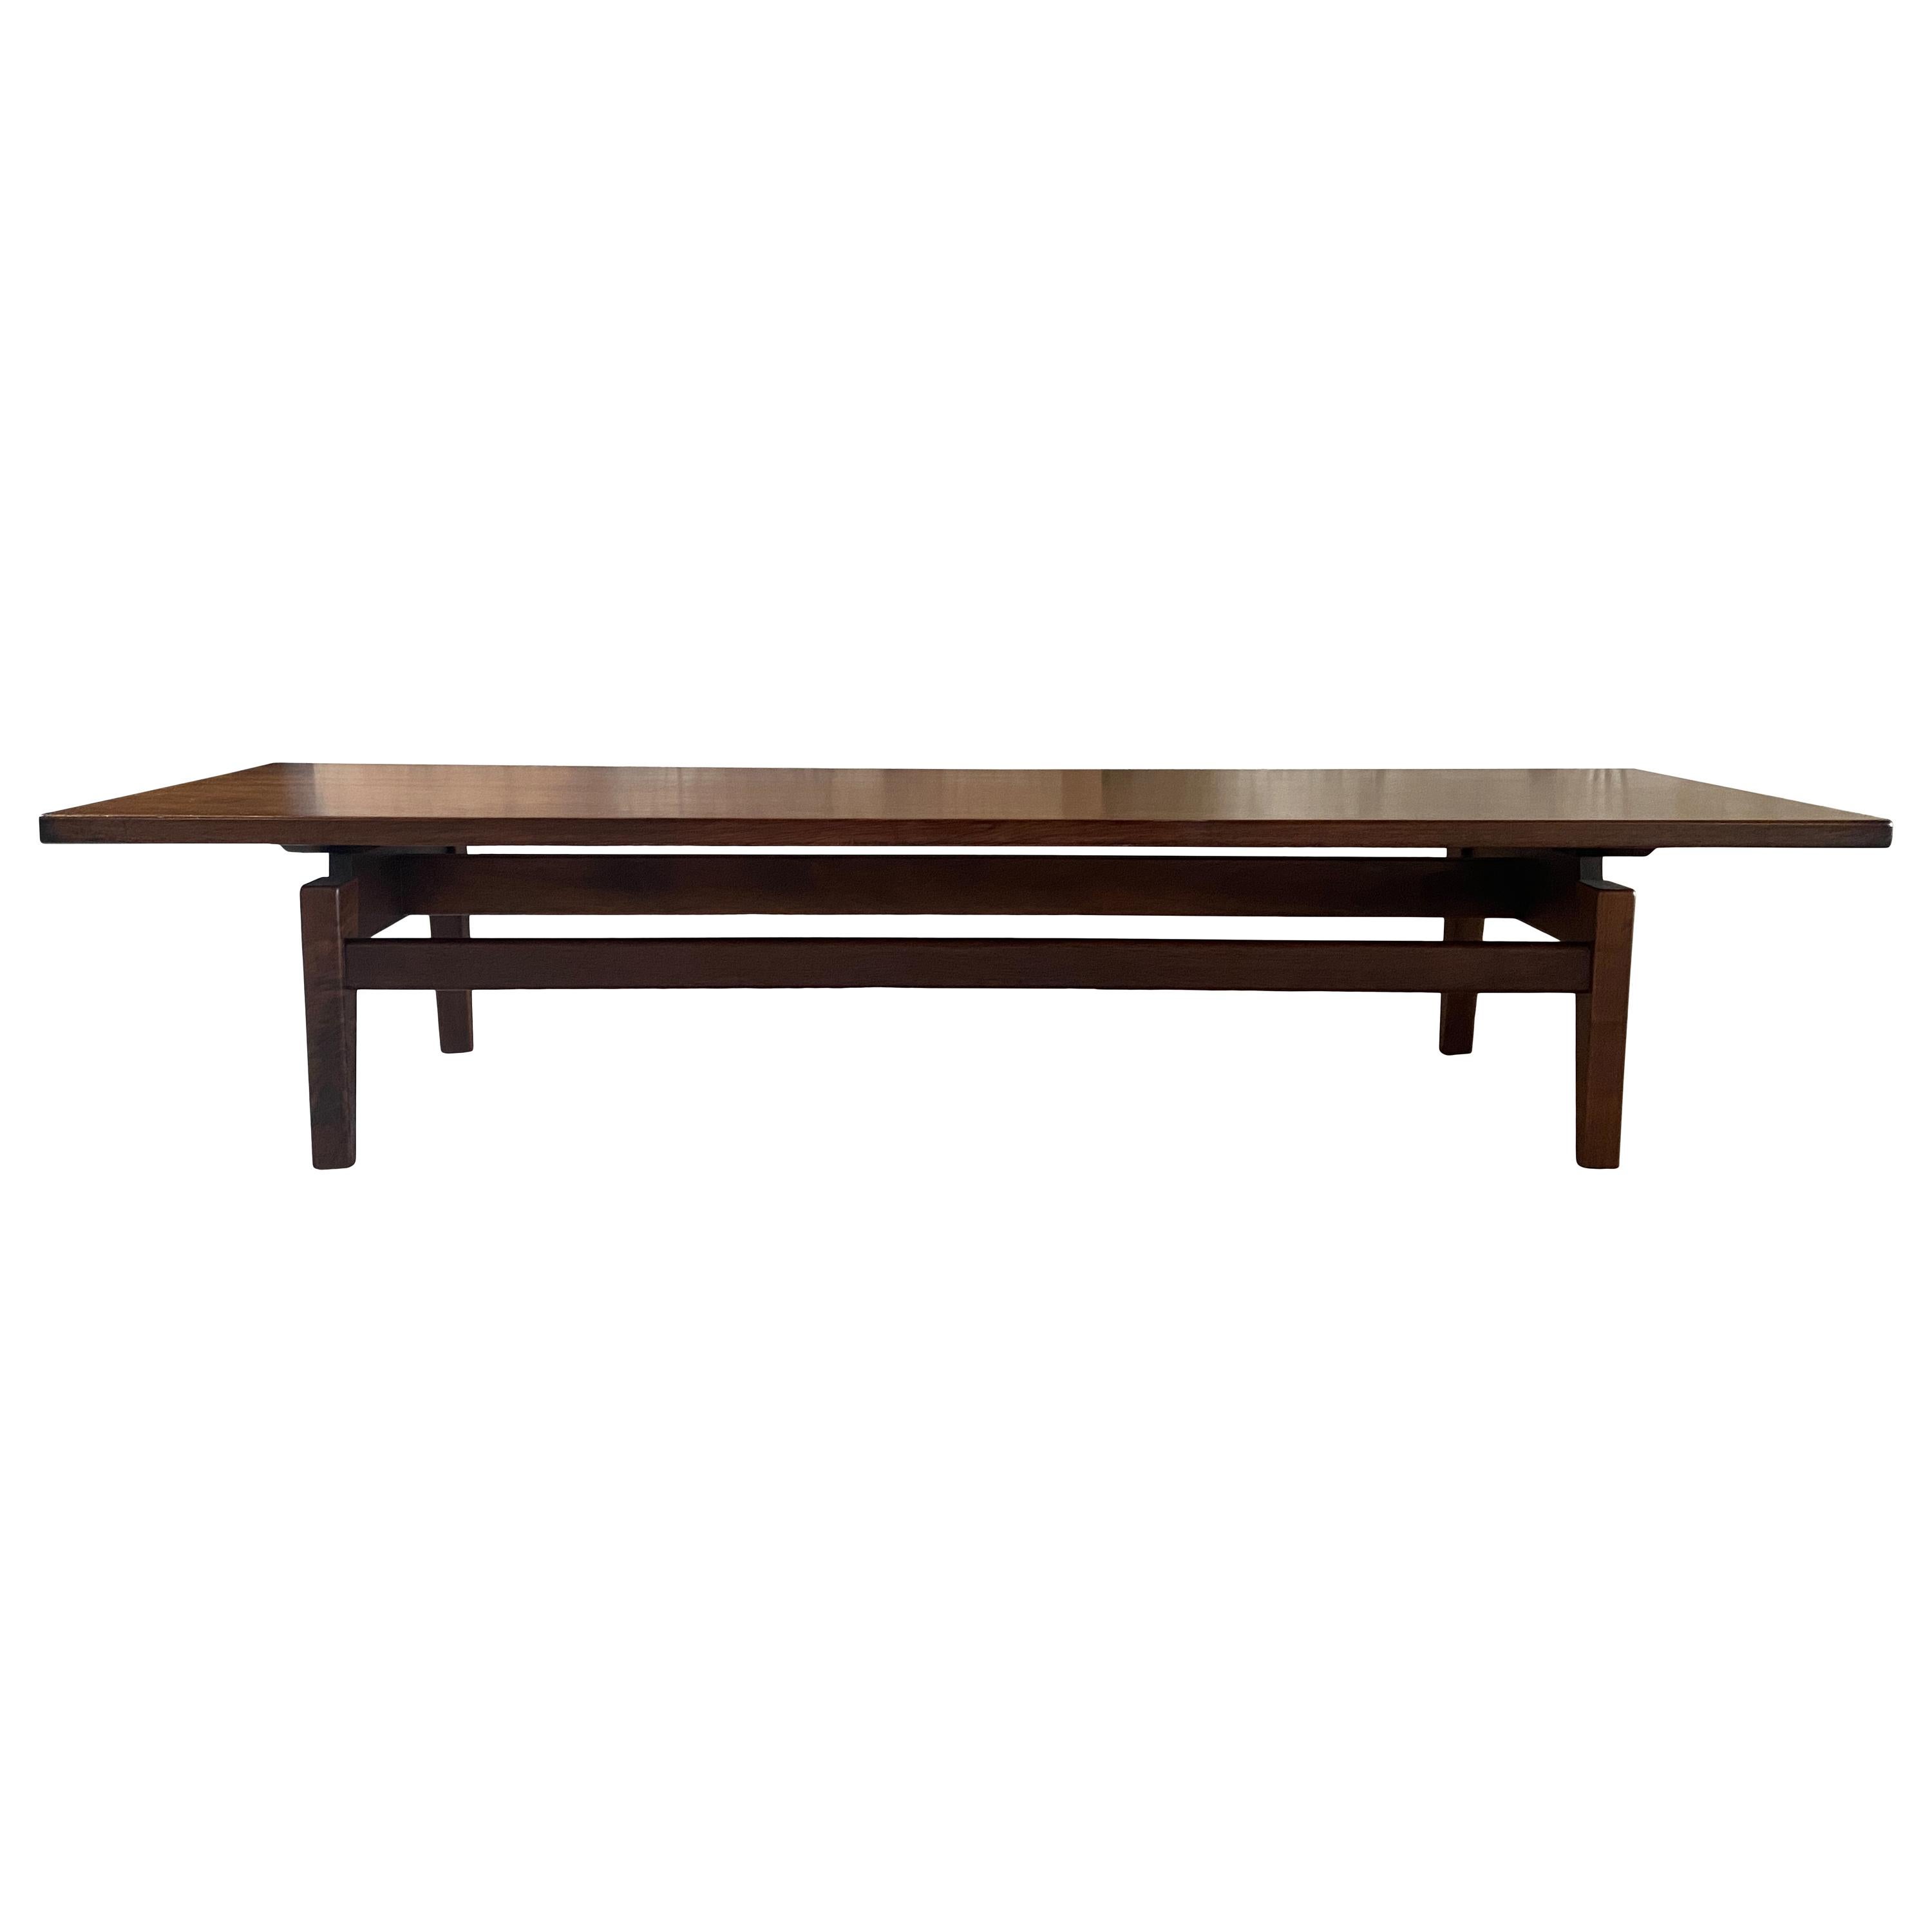 Midcentury Jens Risom Design Walnut Floating Top Coffee Table Bench For Sale